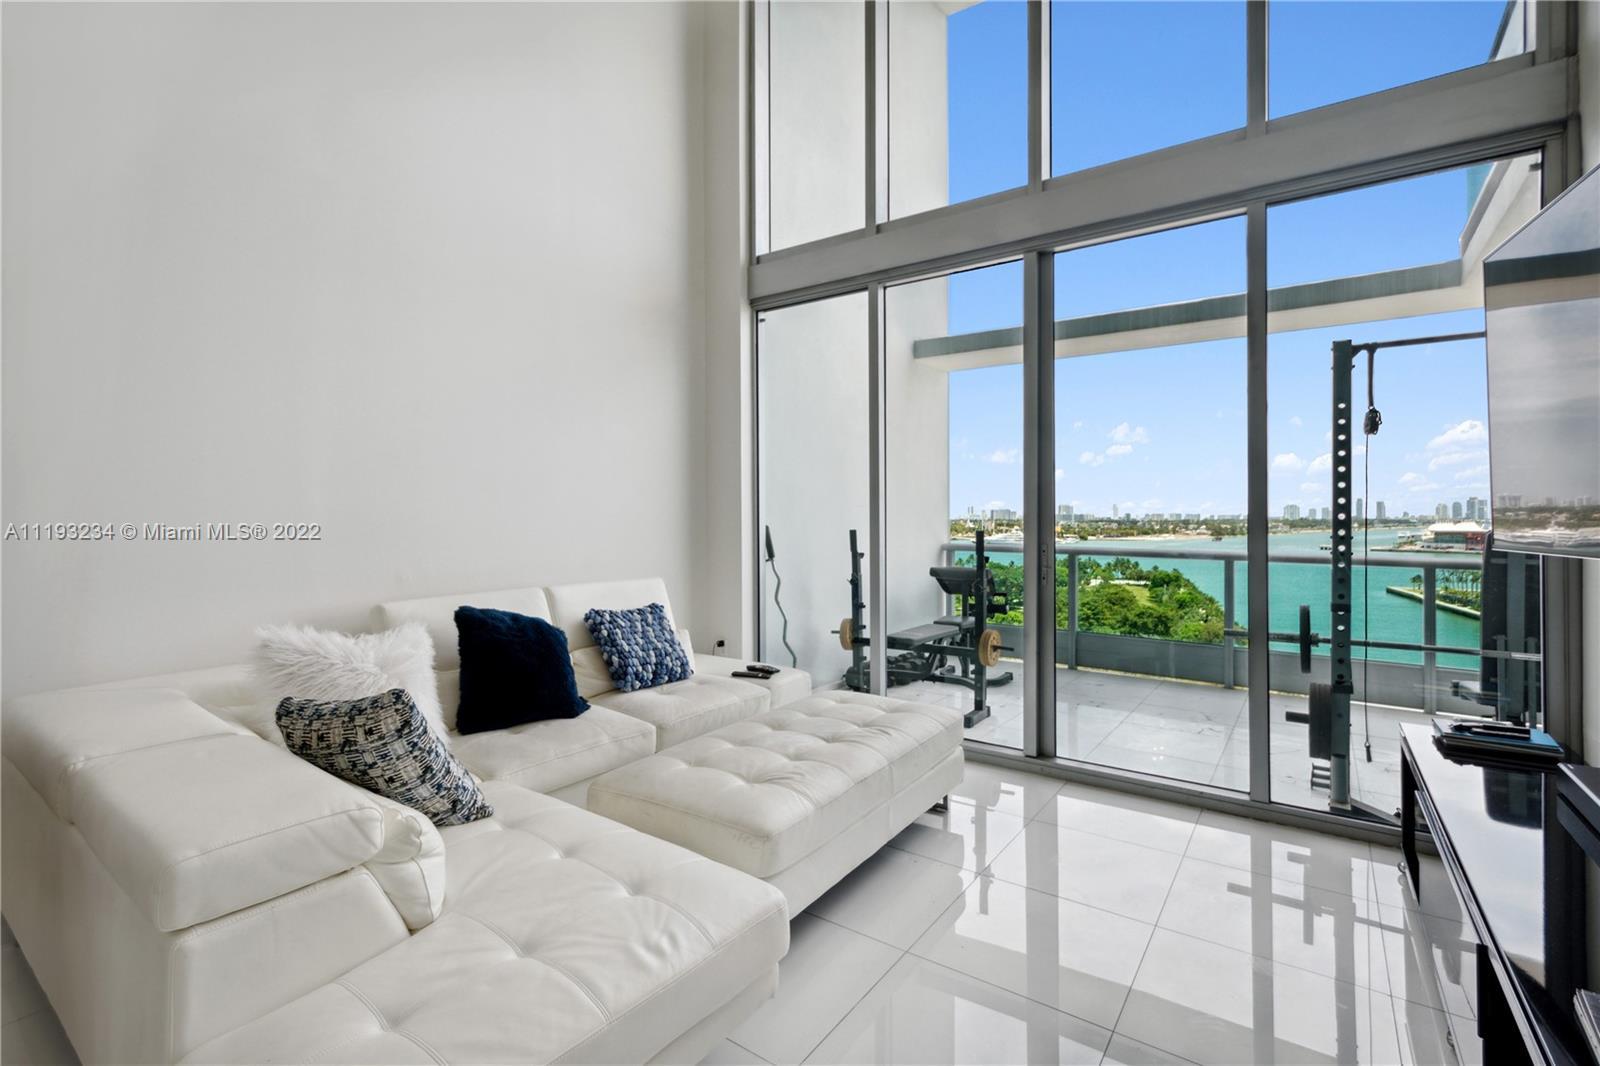 Stunning 2-bed/3-bath 2-story loft style residence with gleaming bay and city views which can be enj